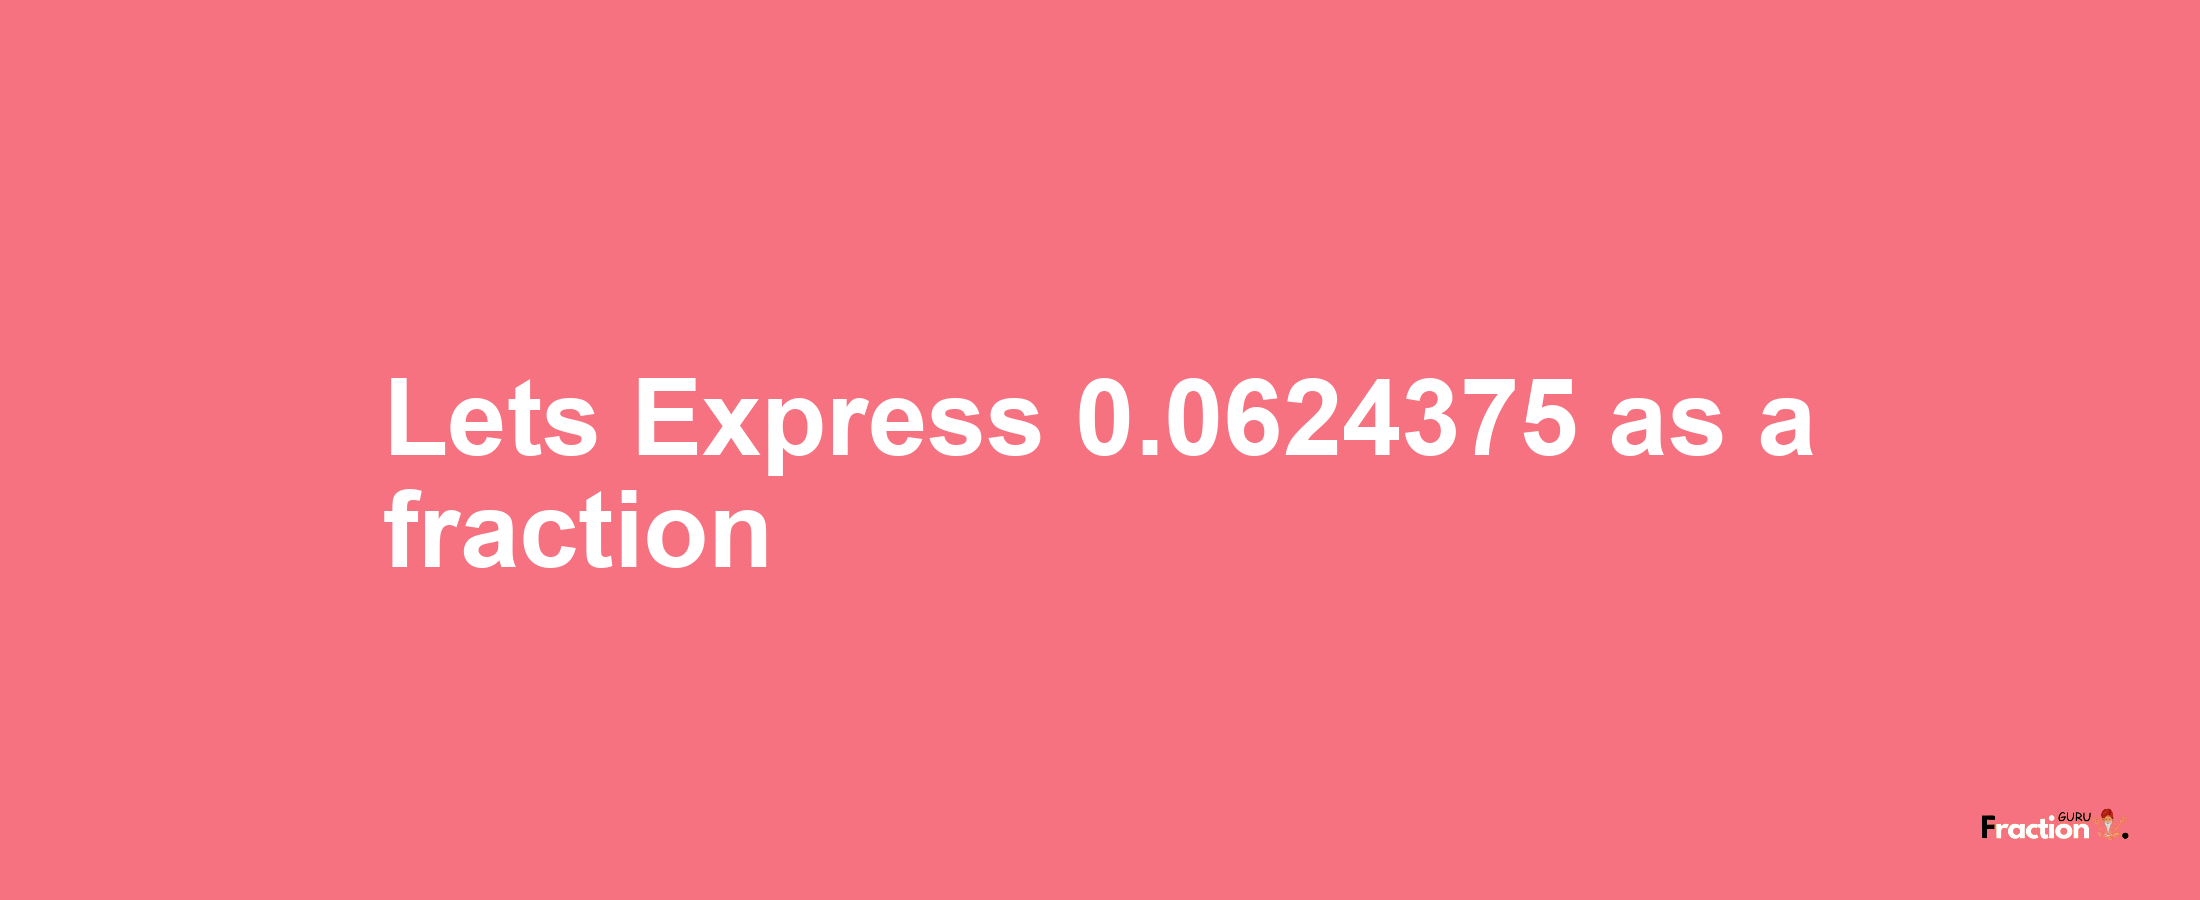 Lets Express 0.0624375 as afraction